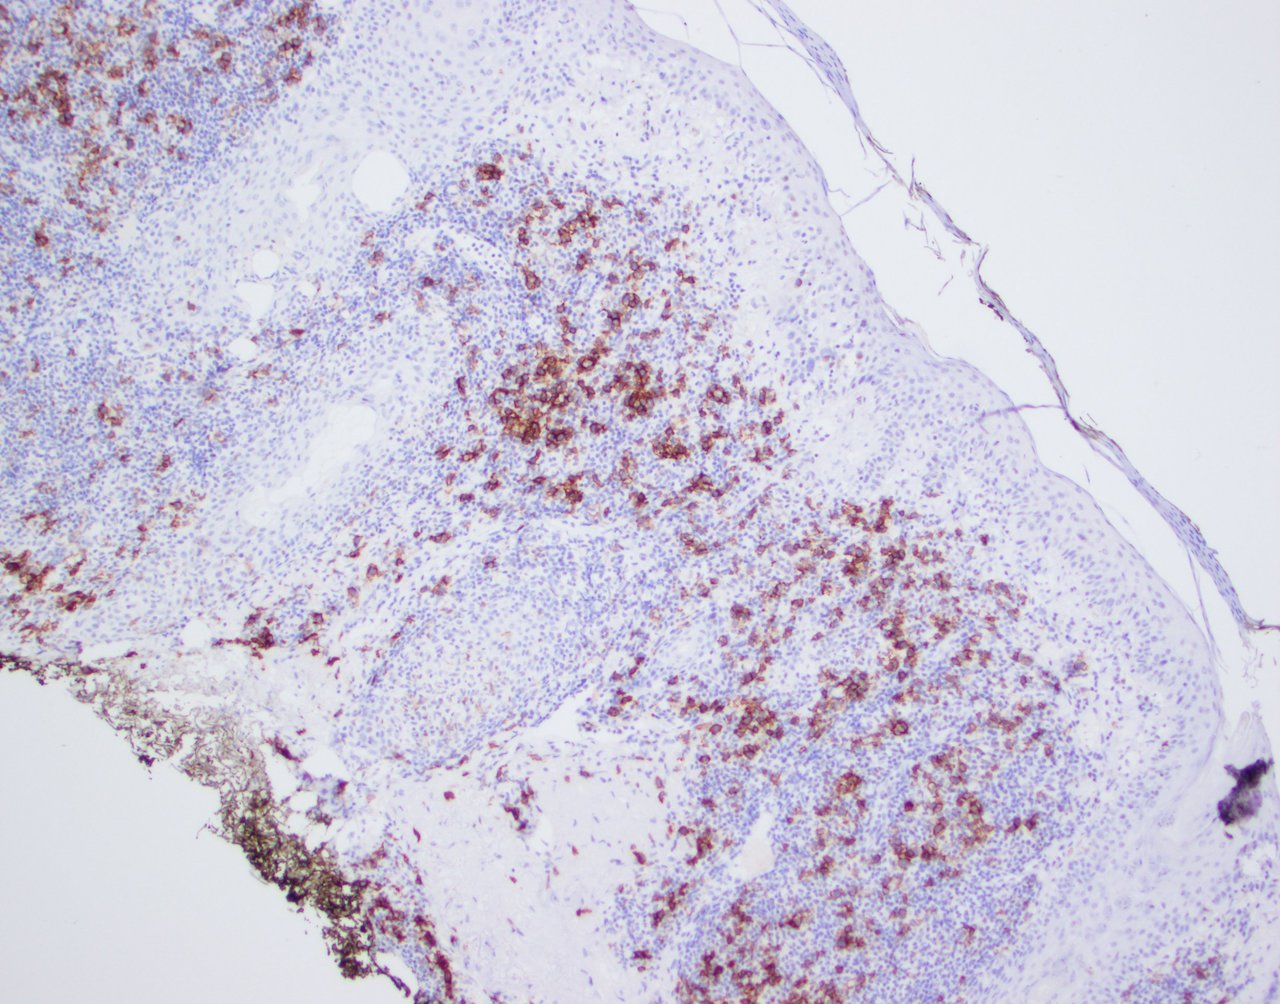 Neoplastic T cells showing strong PD-1 expression